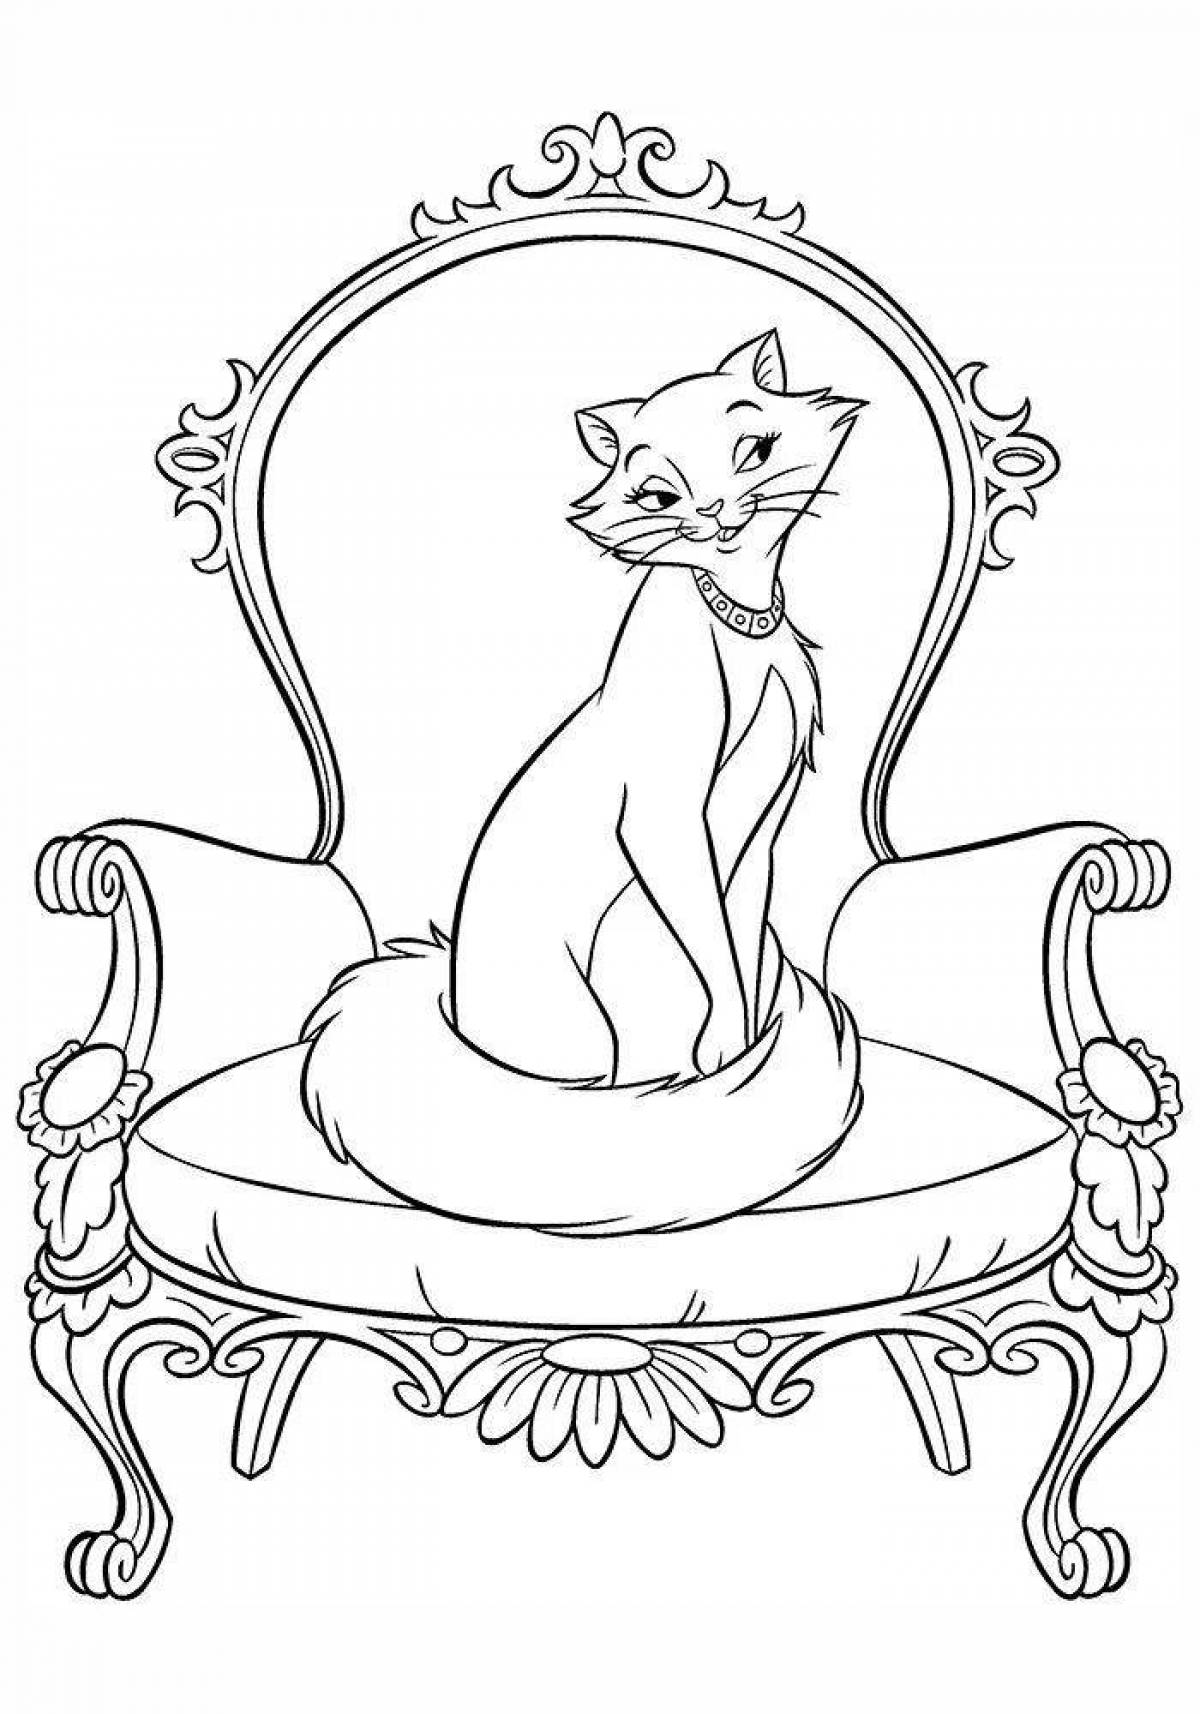 Coloring page gorgeous queen of cats